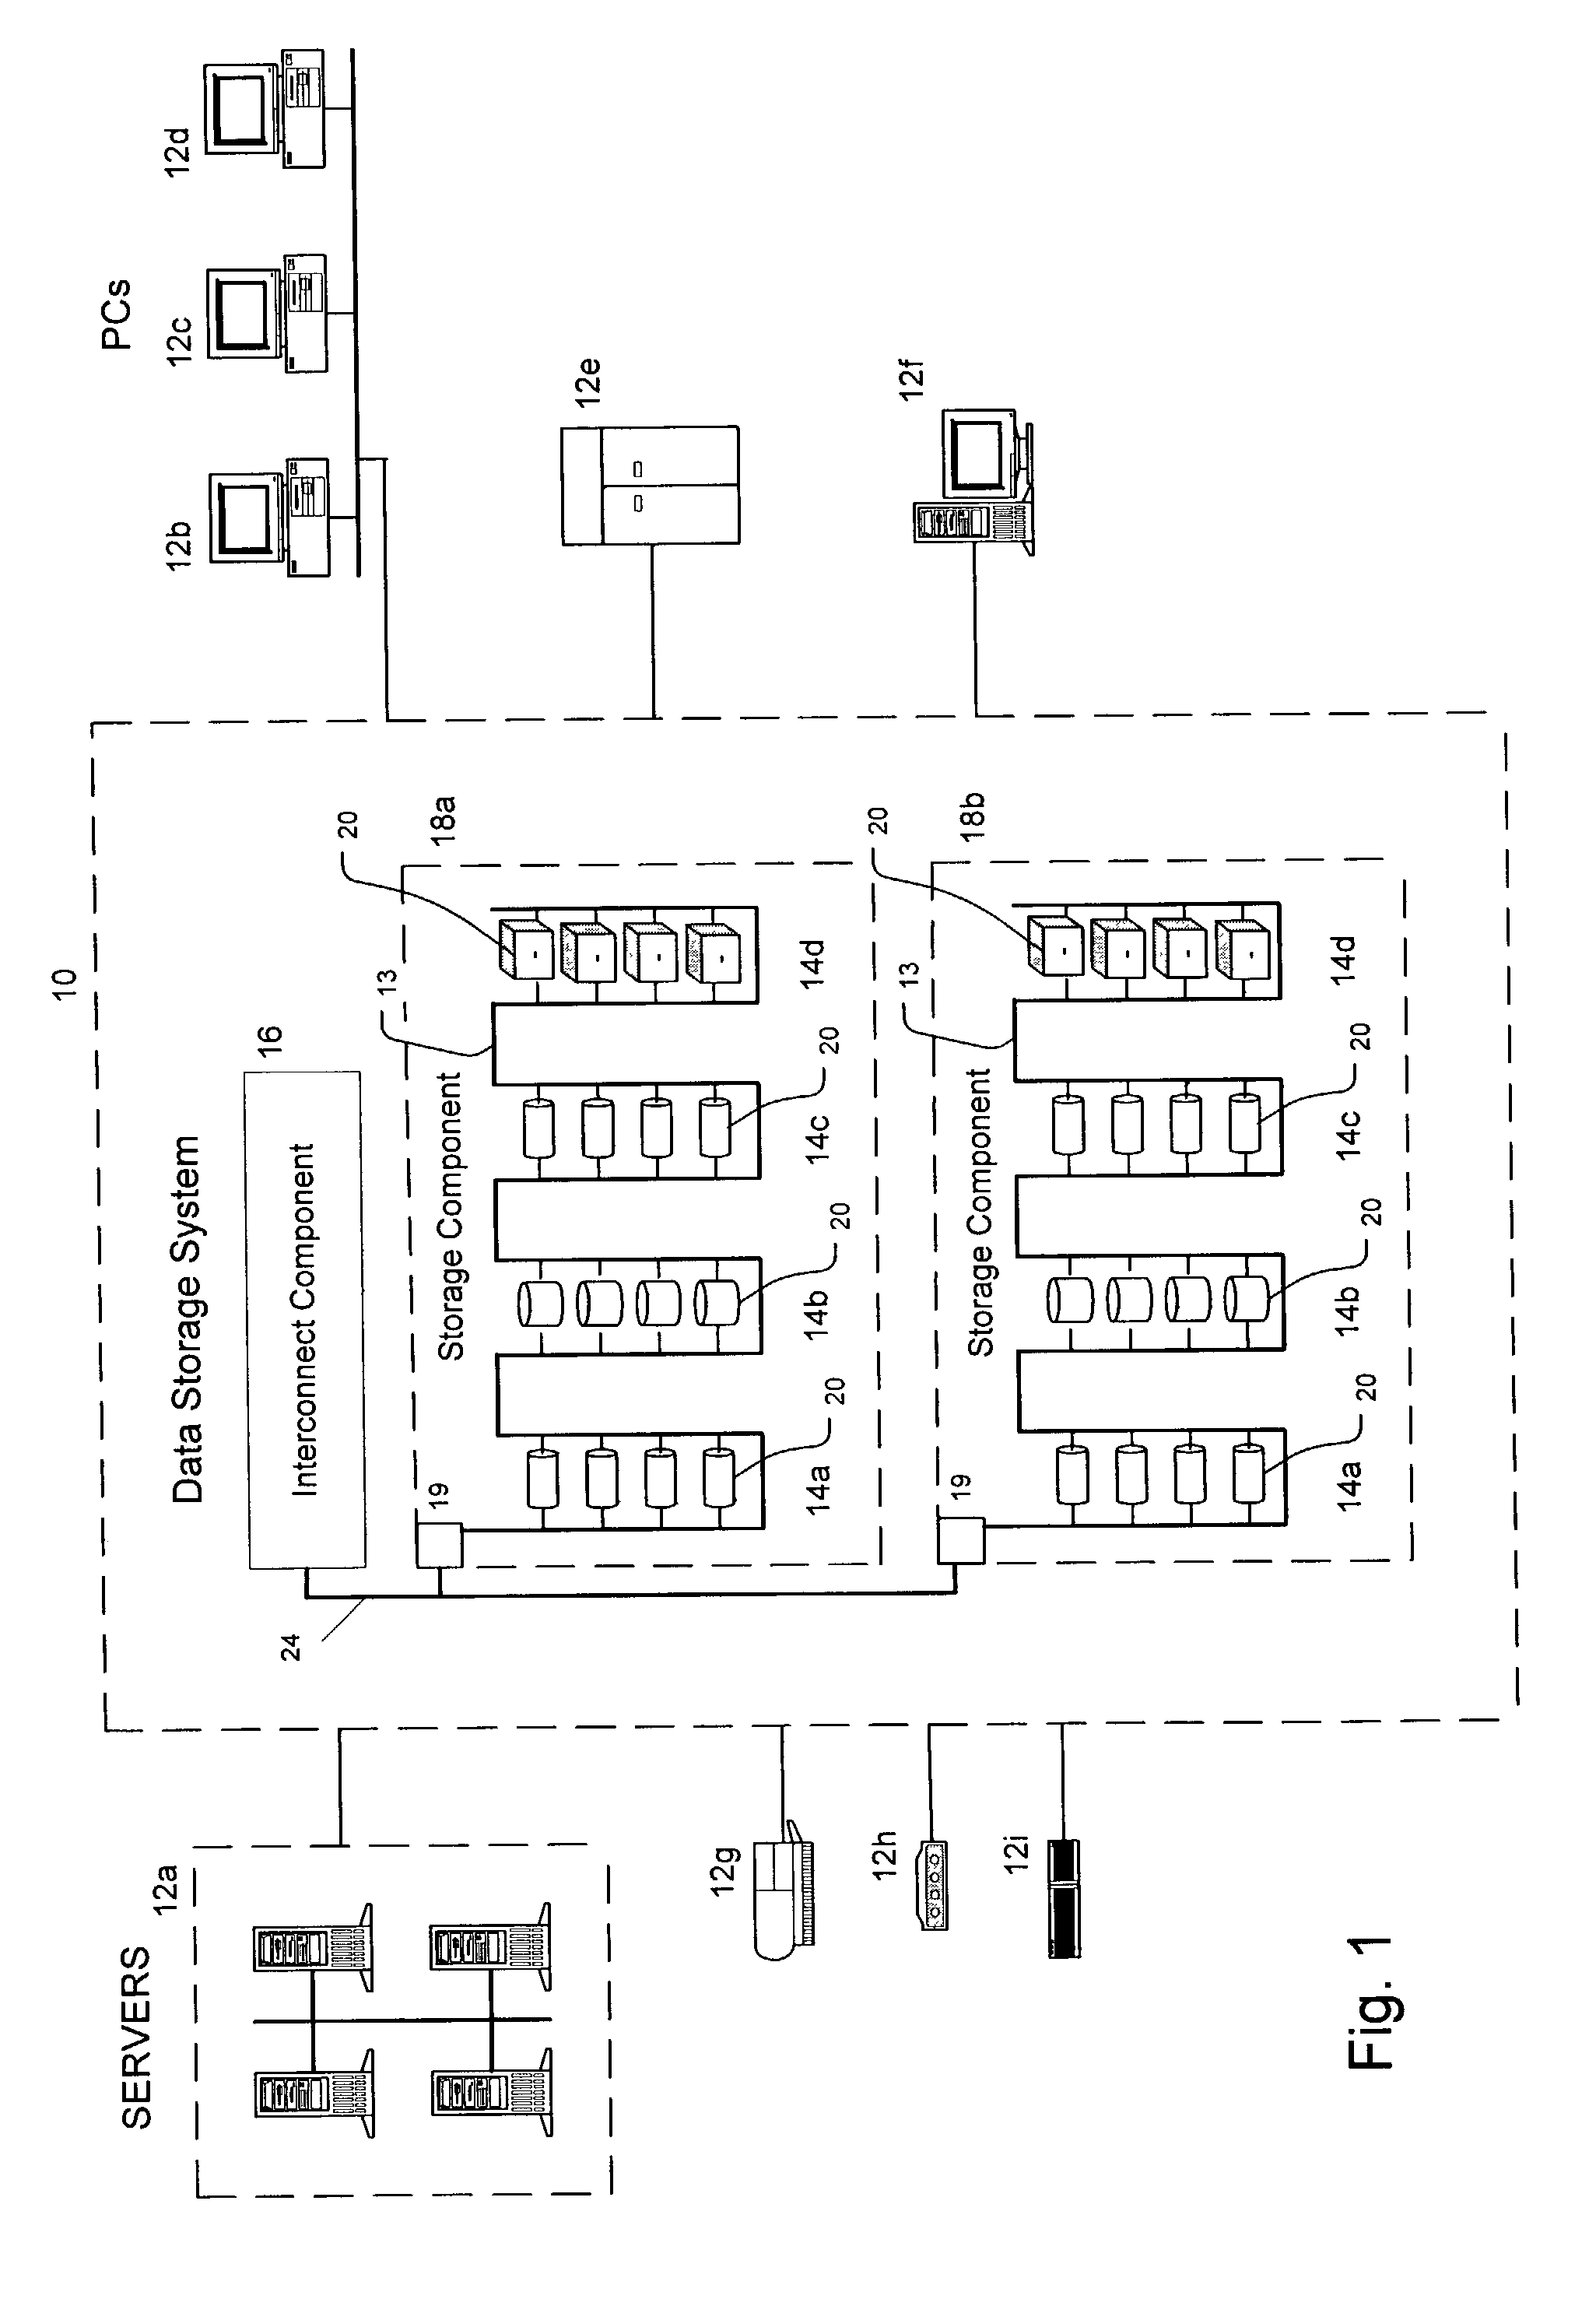 Discovery and isolation of misbehaving devices in a data storage system